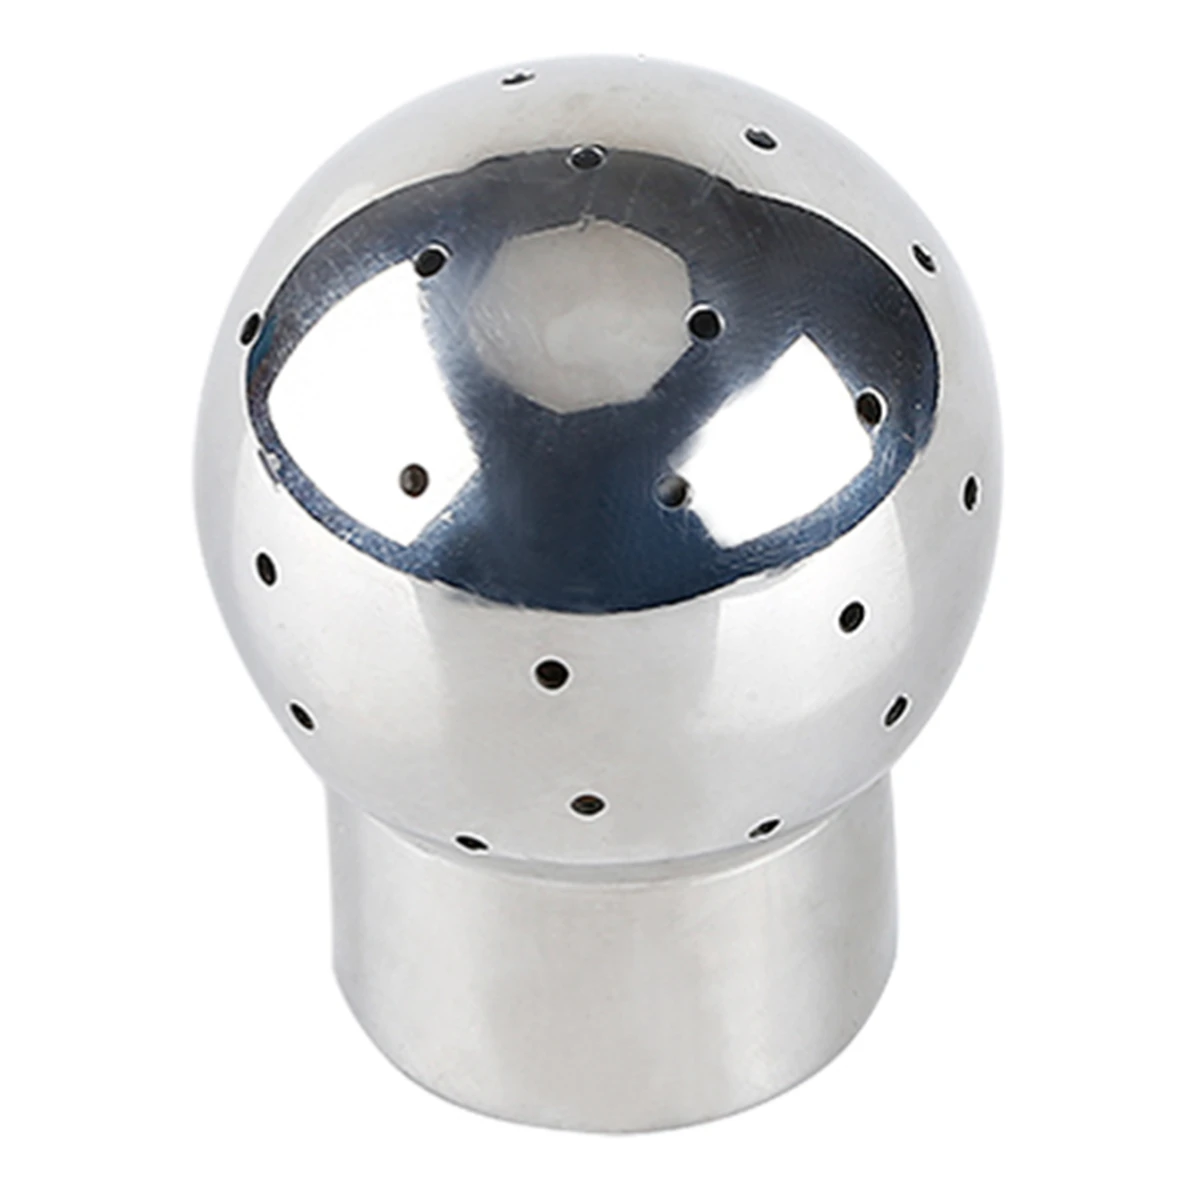 

DN20 3/4" BSP Stainless Steel 316 Female Thread Fixed Tank Cleaning Head Sanitary Rotary Spray Ball